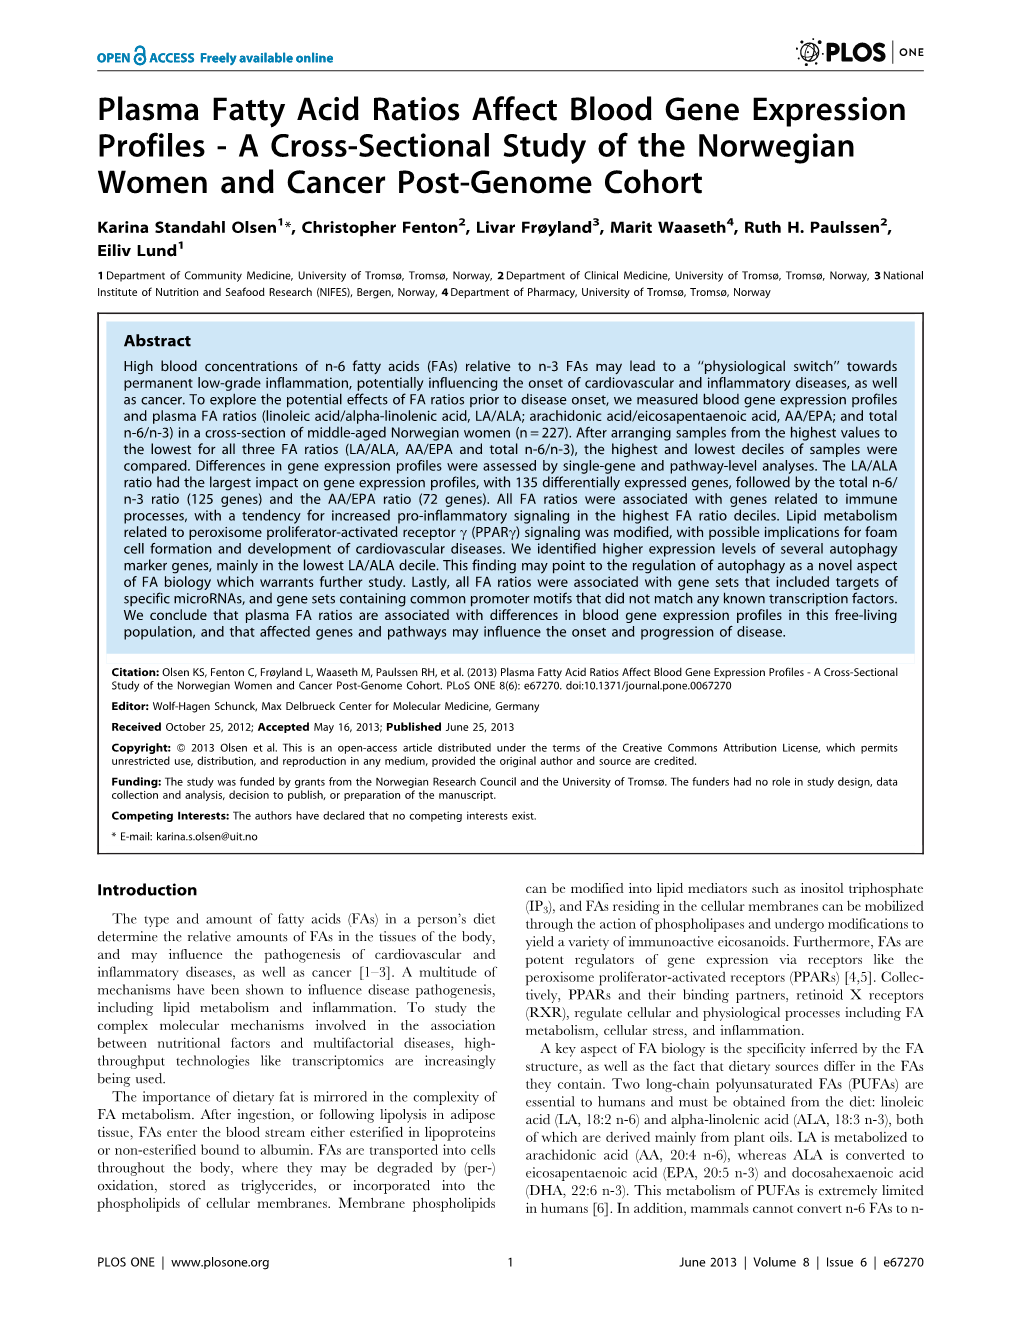 Plasma Fatty Acid Ratios Affect Blood Gene Expression Profiles - a Cross-Sectional Study of the Norwegian Women and Cancer Post-Genome Cohort